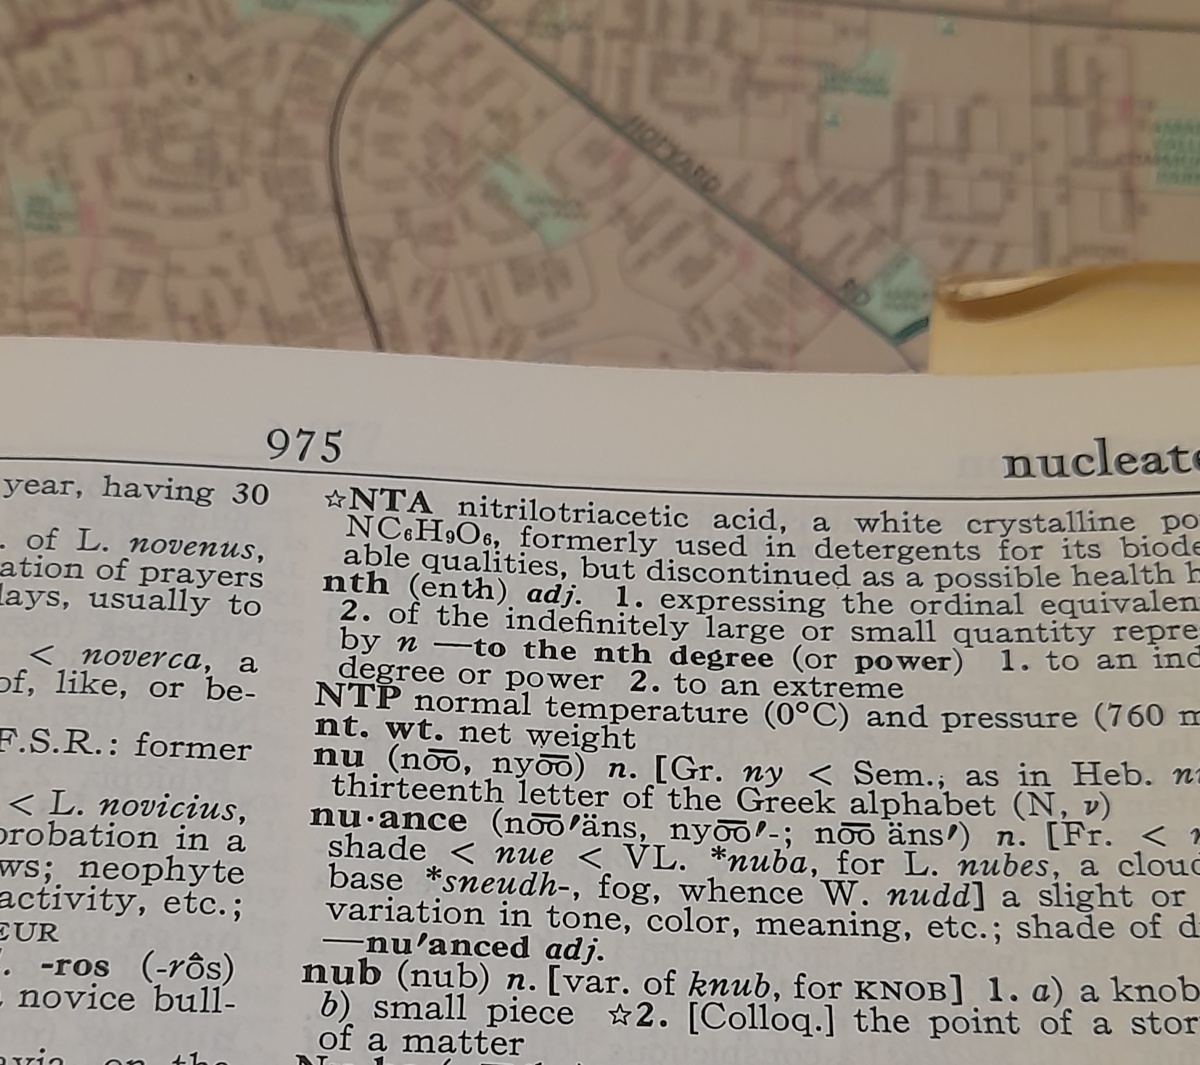 Pronunciation Guides and Paper Maps: A Wee Rant